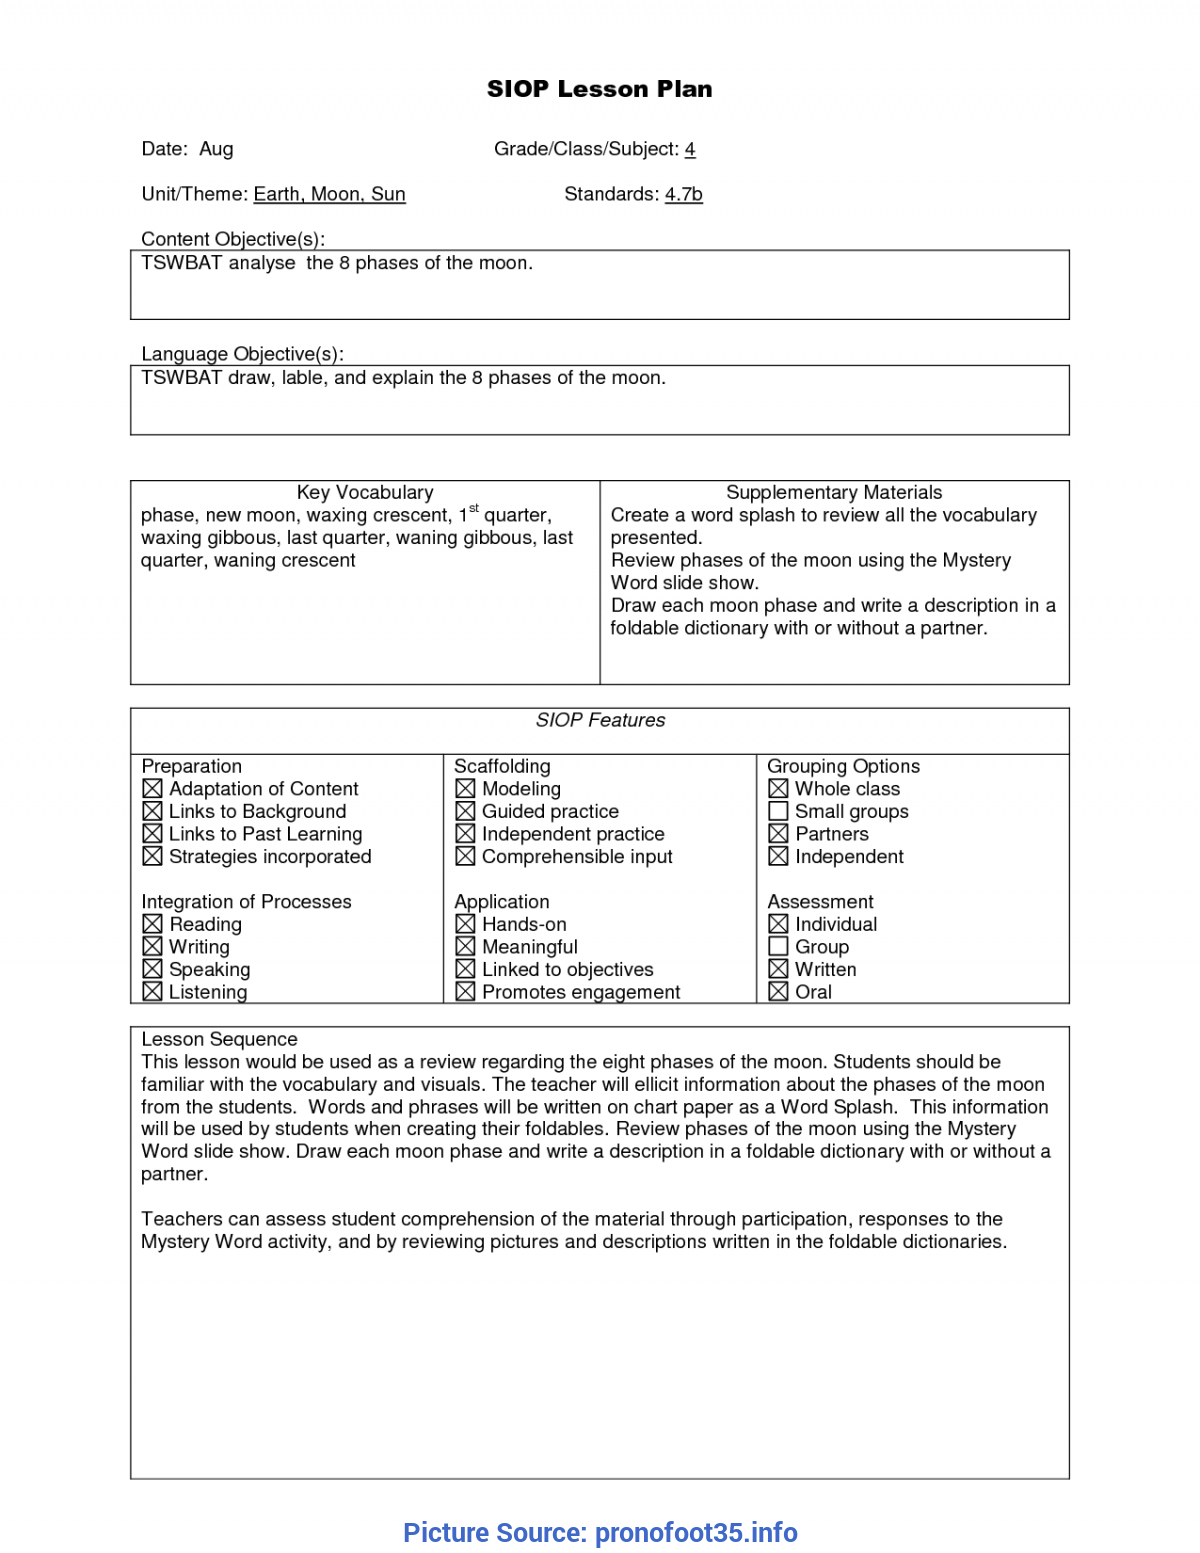 Siop Lesson Plan Template | | Tryprodermag - Ota Tech